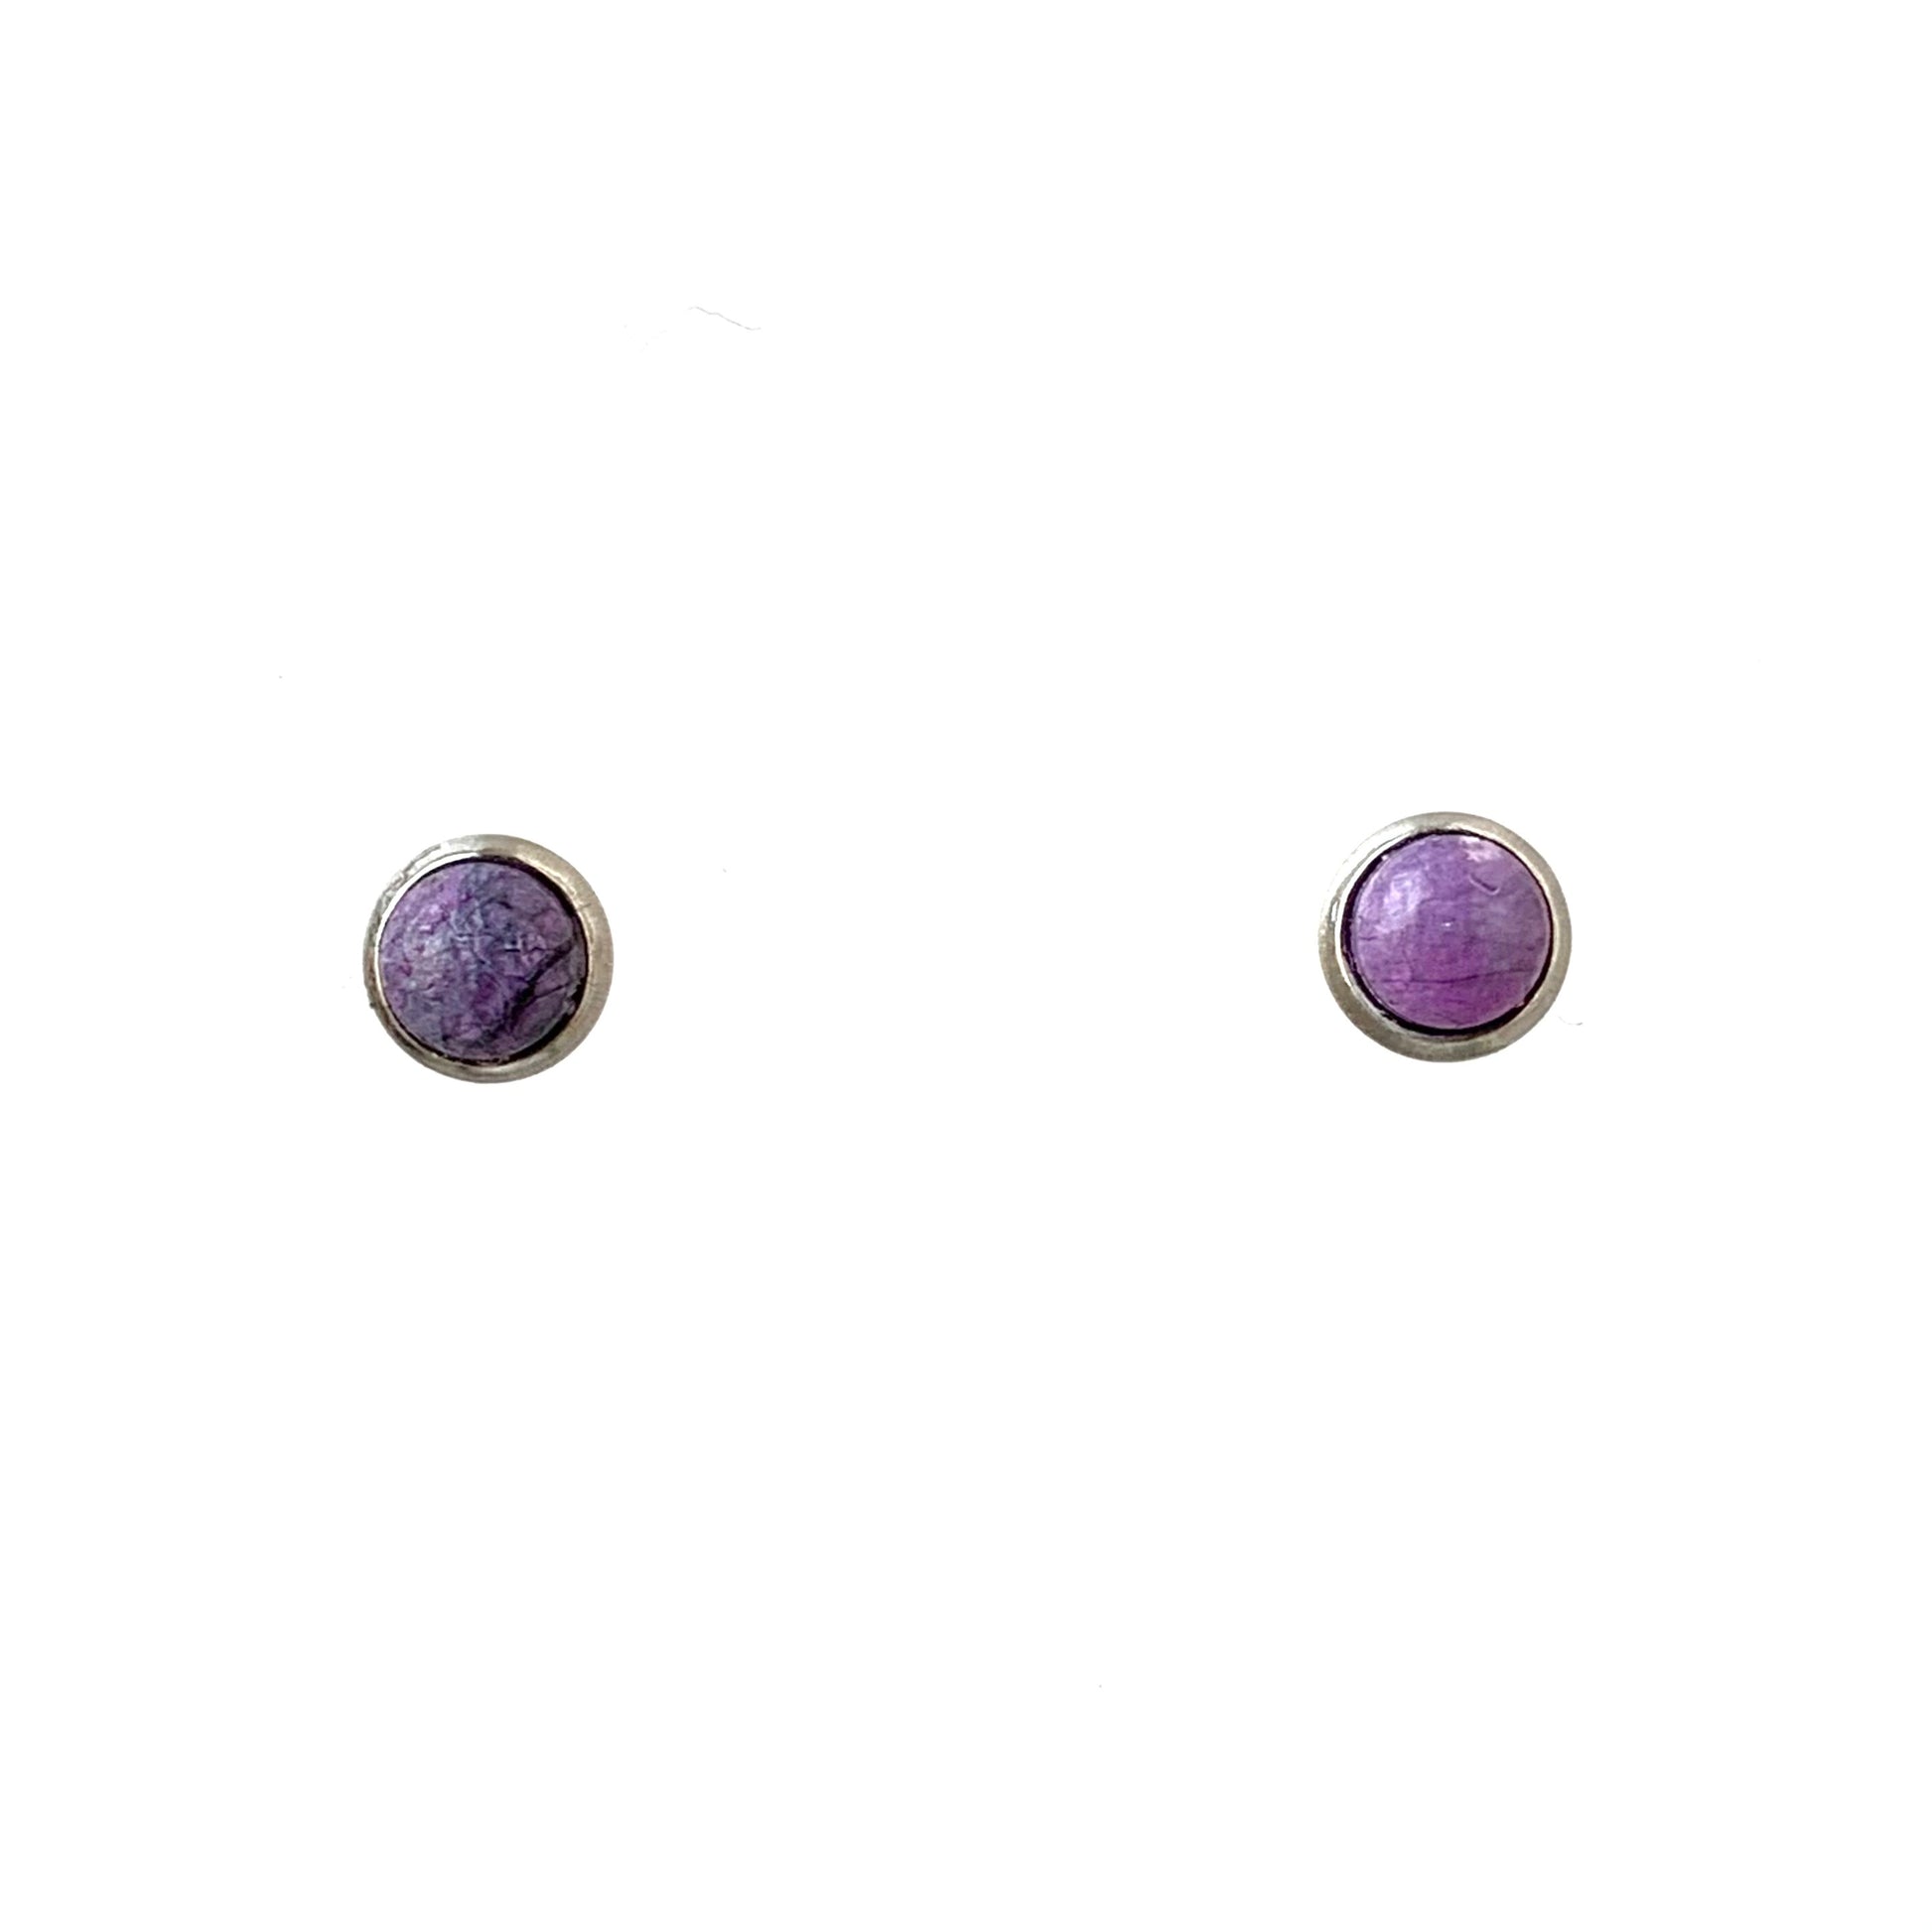 Small purple studs handmade from recycled plastic